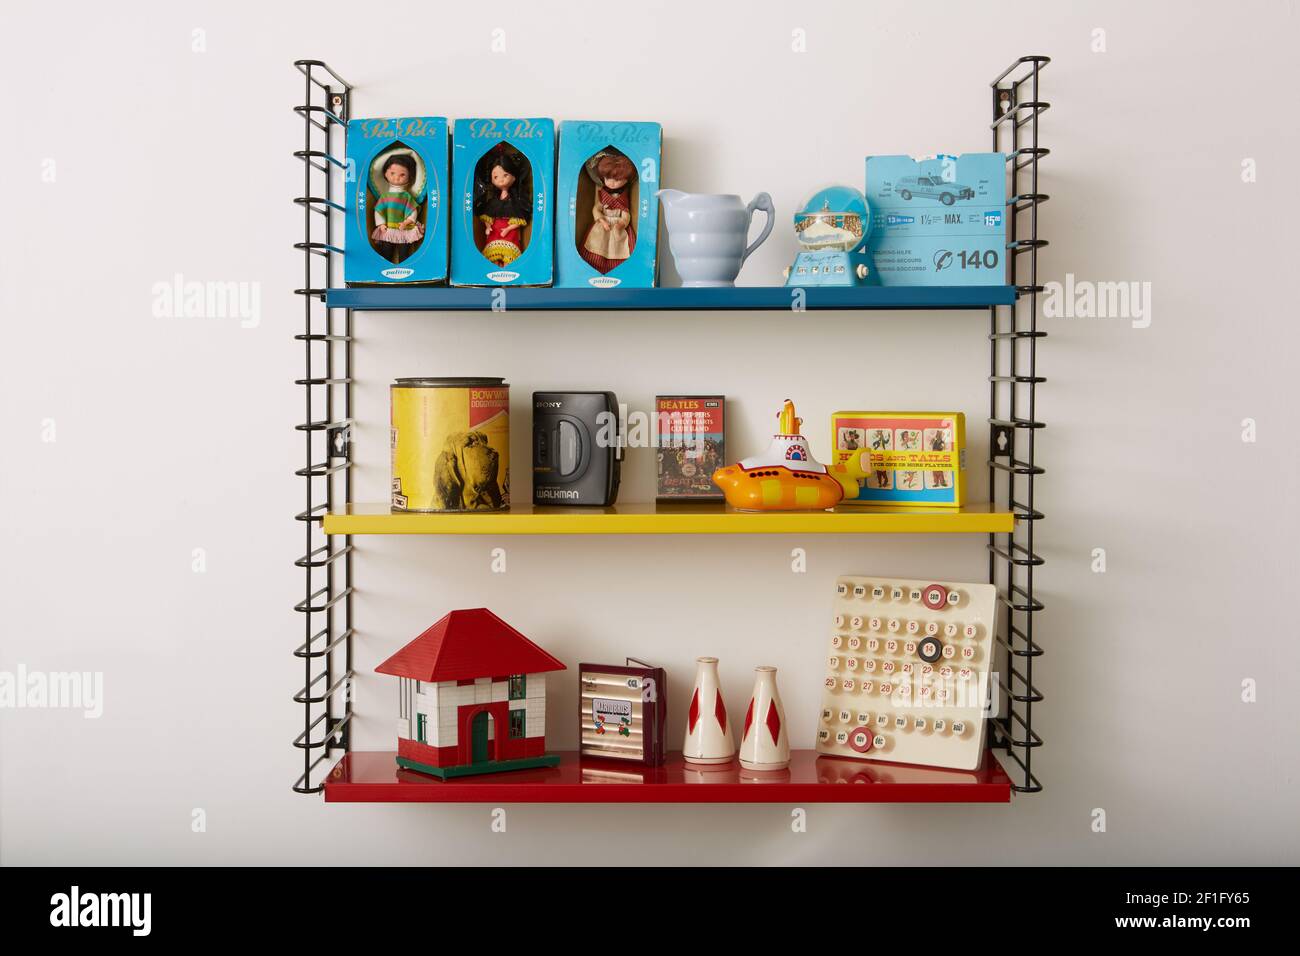 Photograph of various objects on a retro style metal shelving unit. Stock Photo